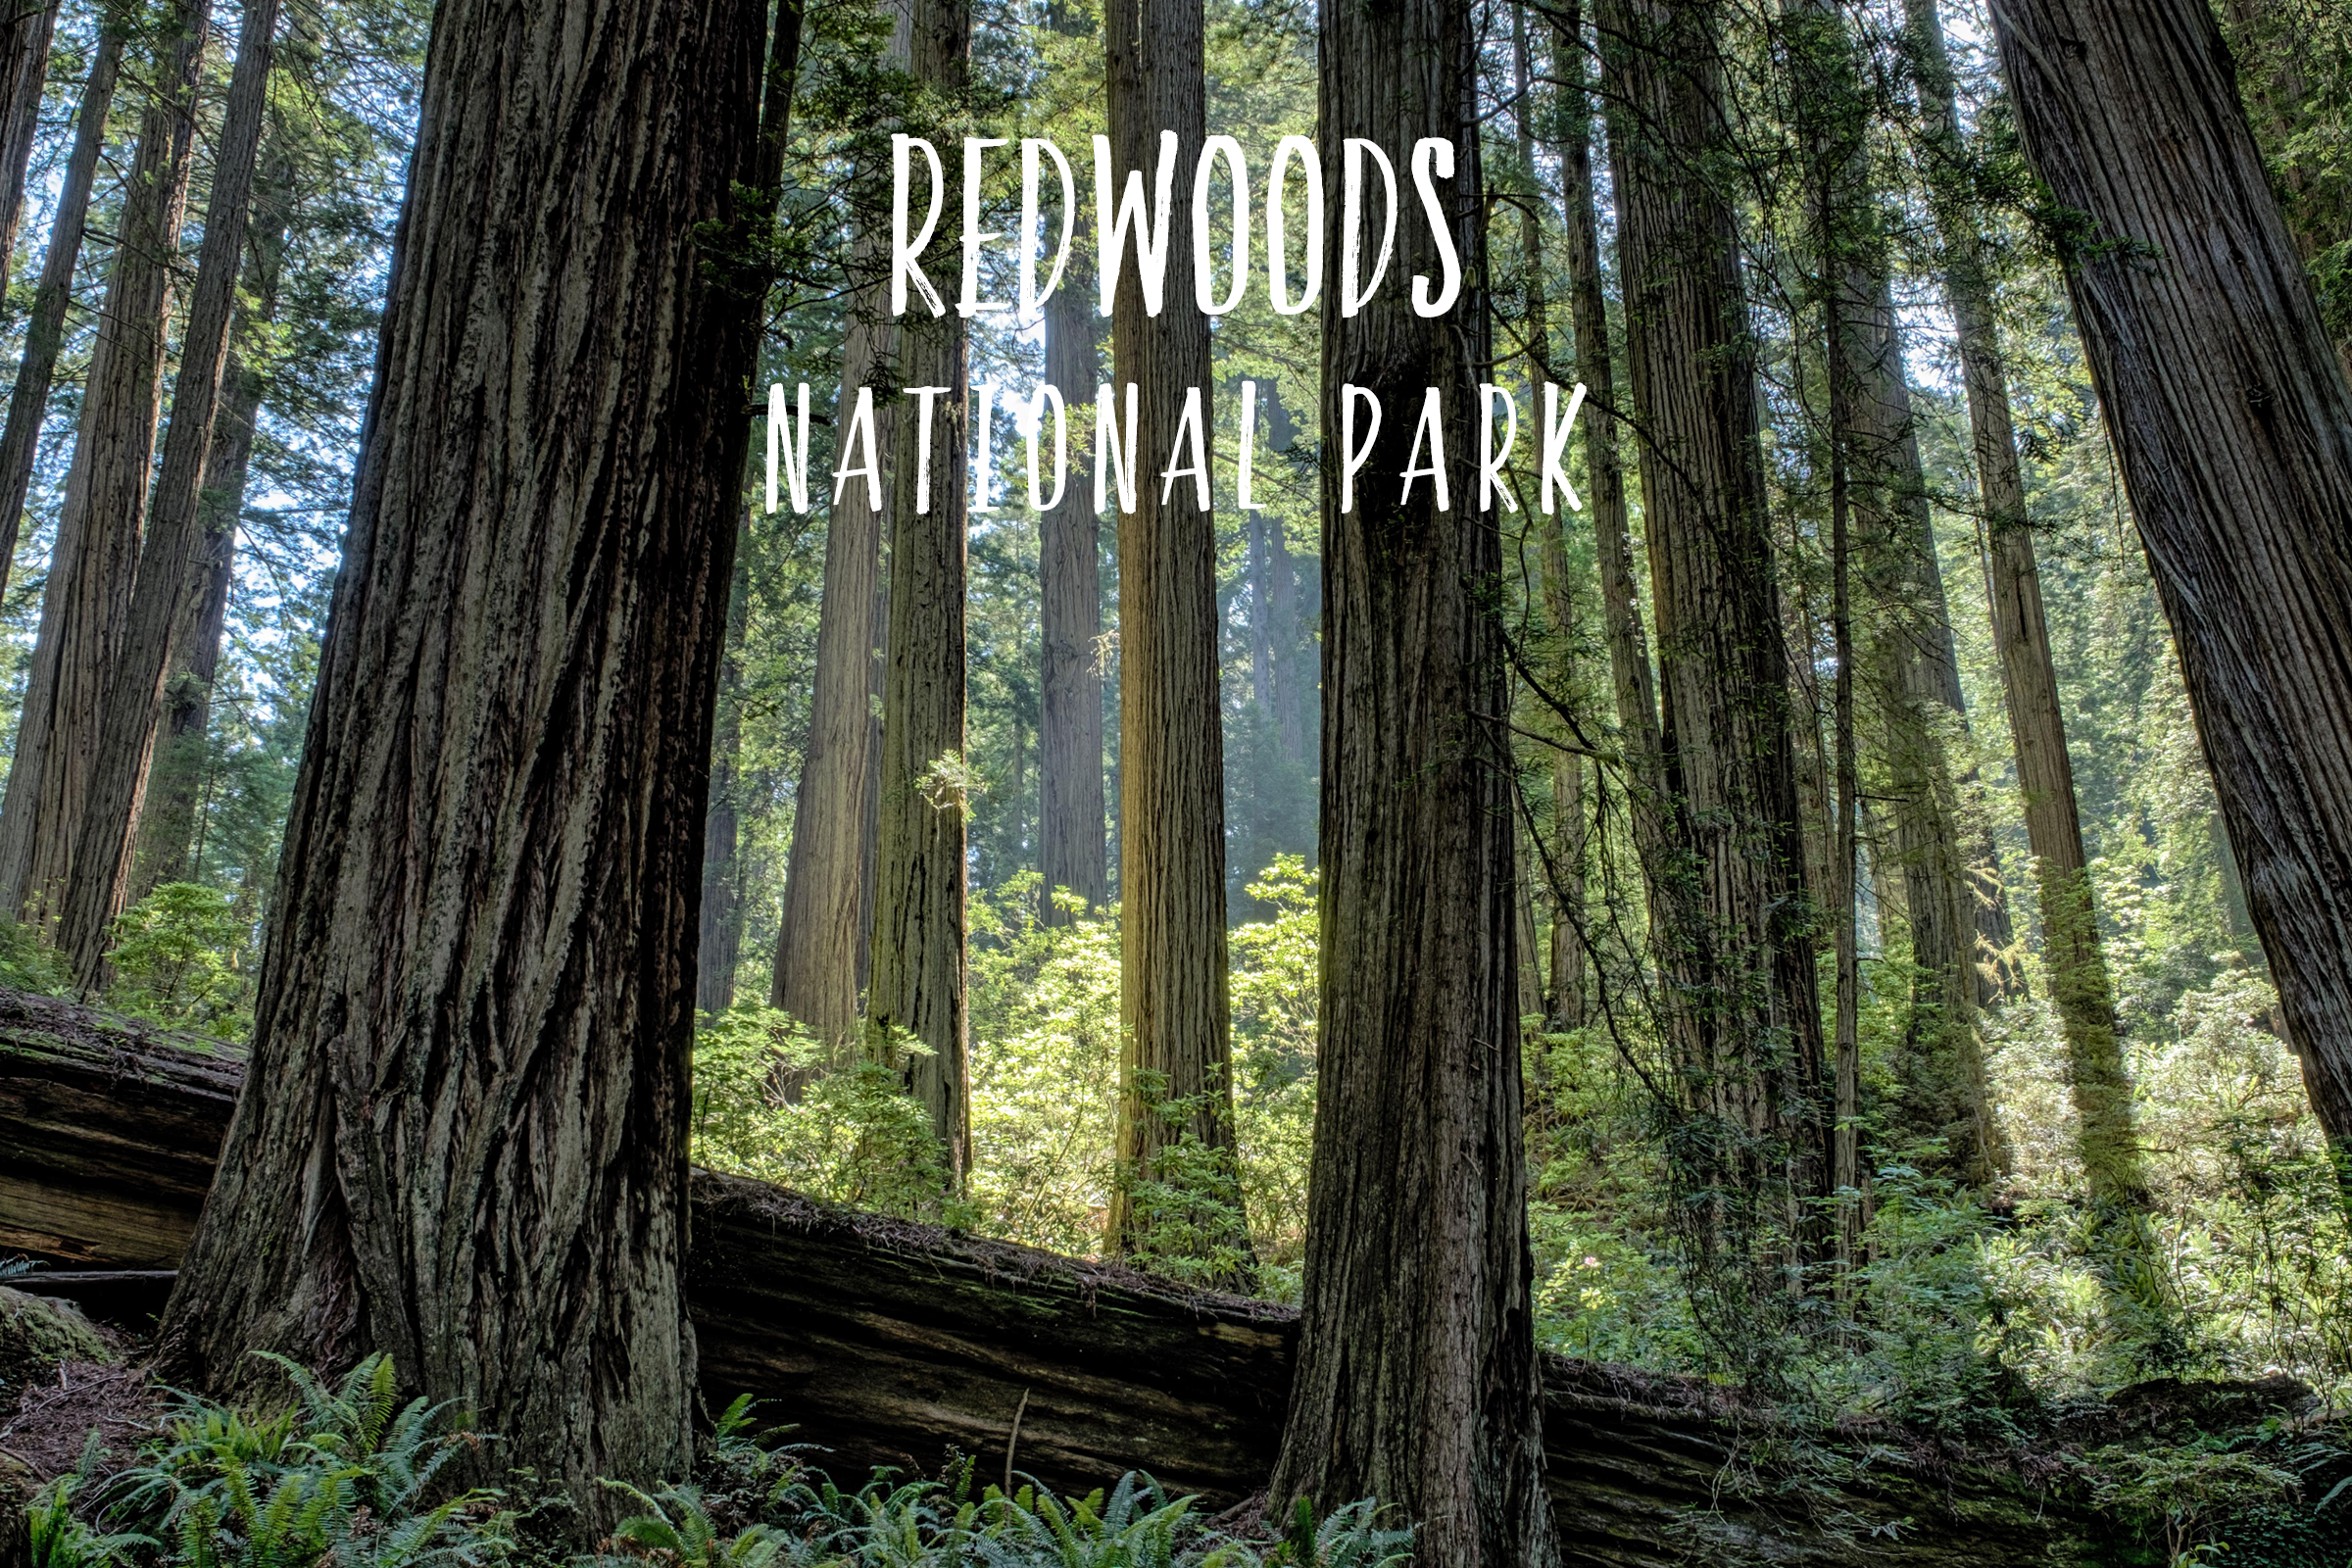 59in52_np-page_redwoods.jpg